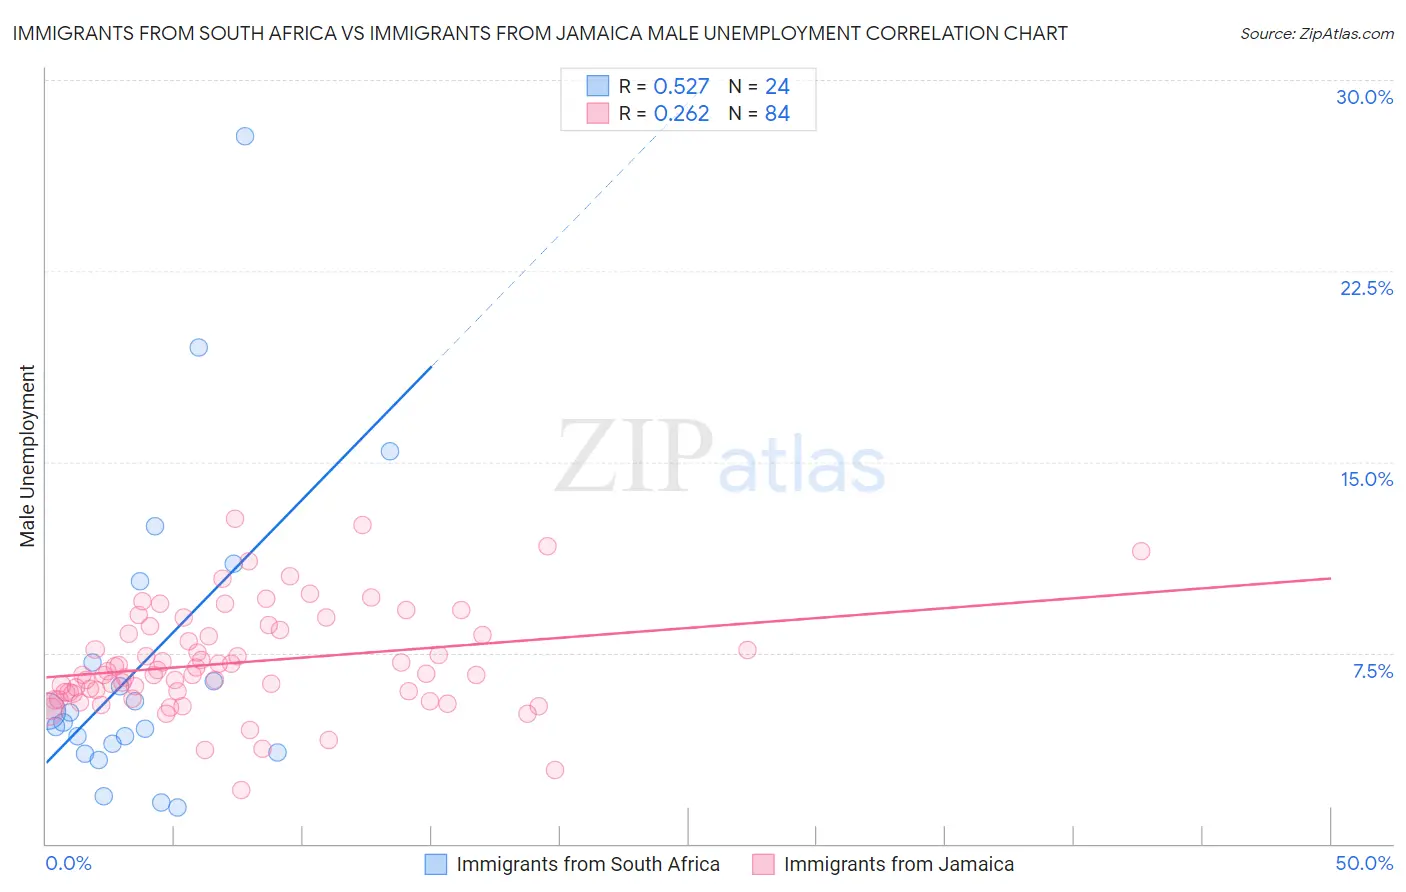 Immigrants from South Africa vs Immigrants from Jamaica Male Unemployment